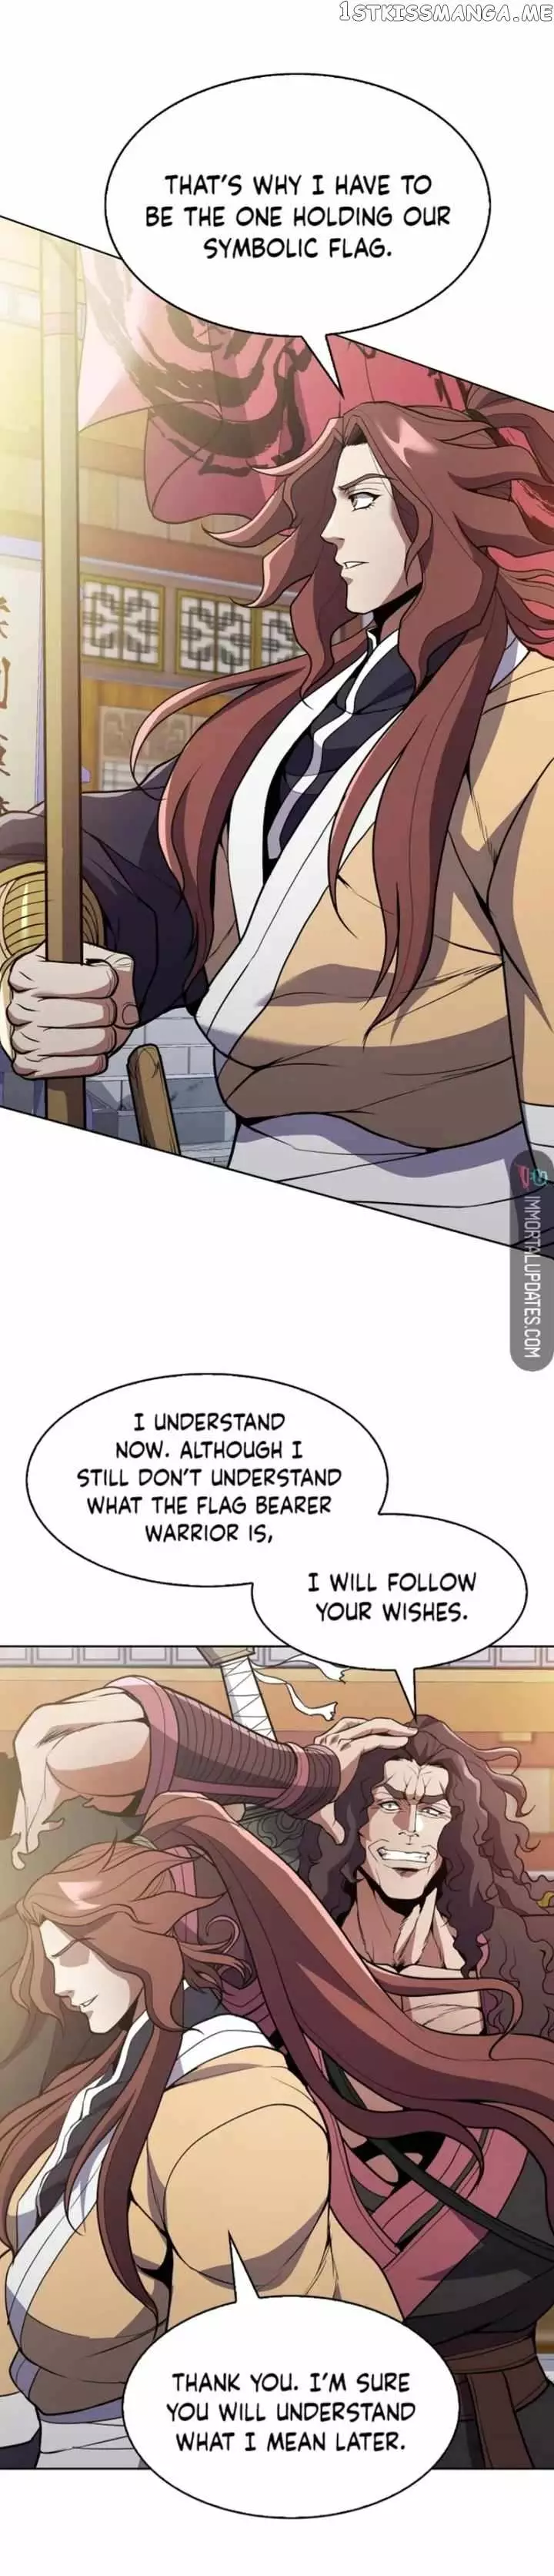 The Flag Bearer Warrior - 26 page 23-a19f4dc5